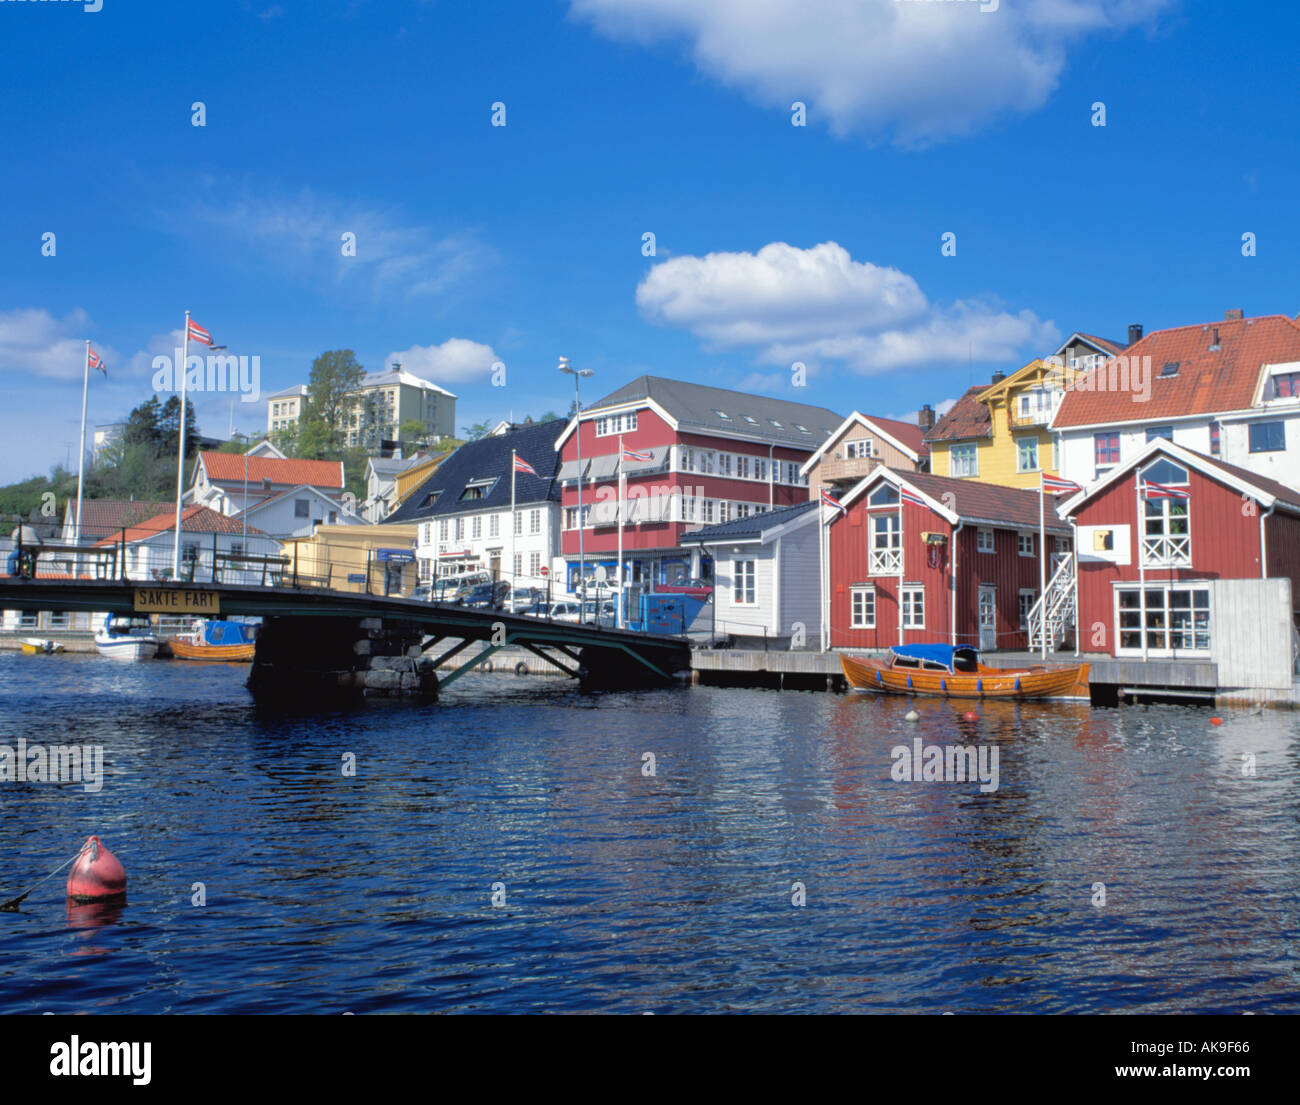 Brightly painted picturesque traditional old timber waterfront buildings, Kragerø, Telemark, Norway. Stock Photo